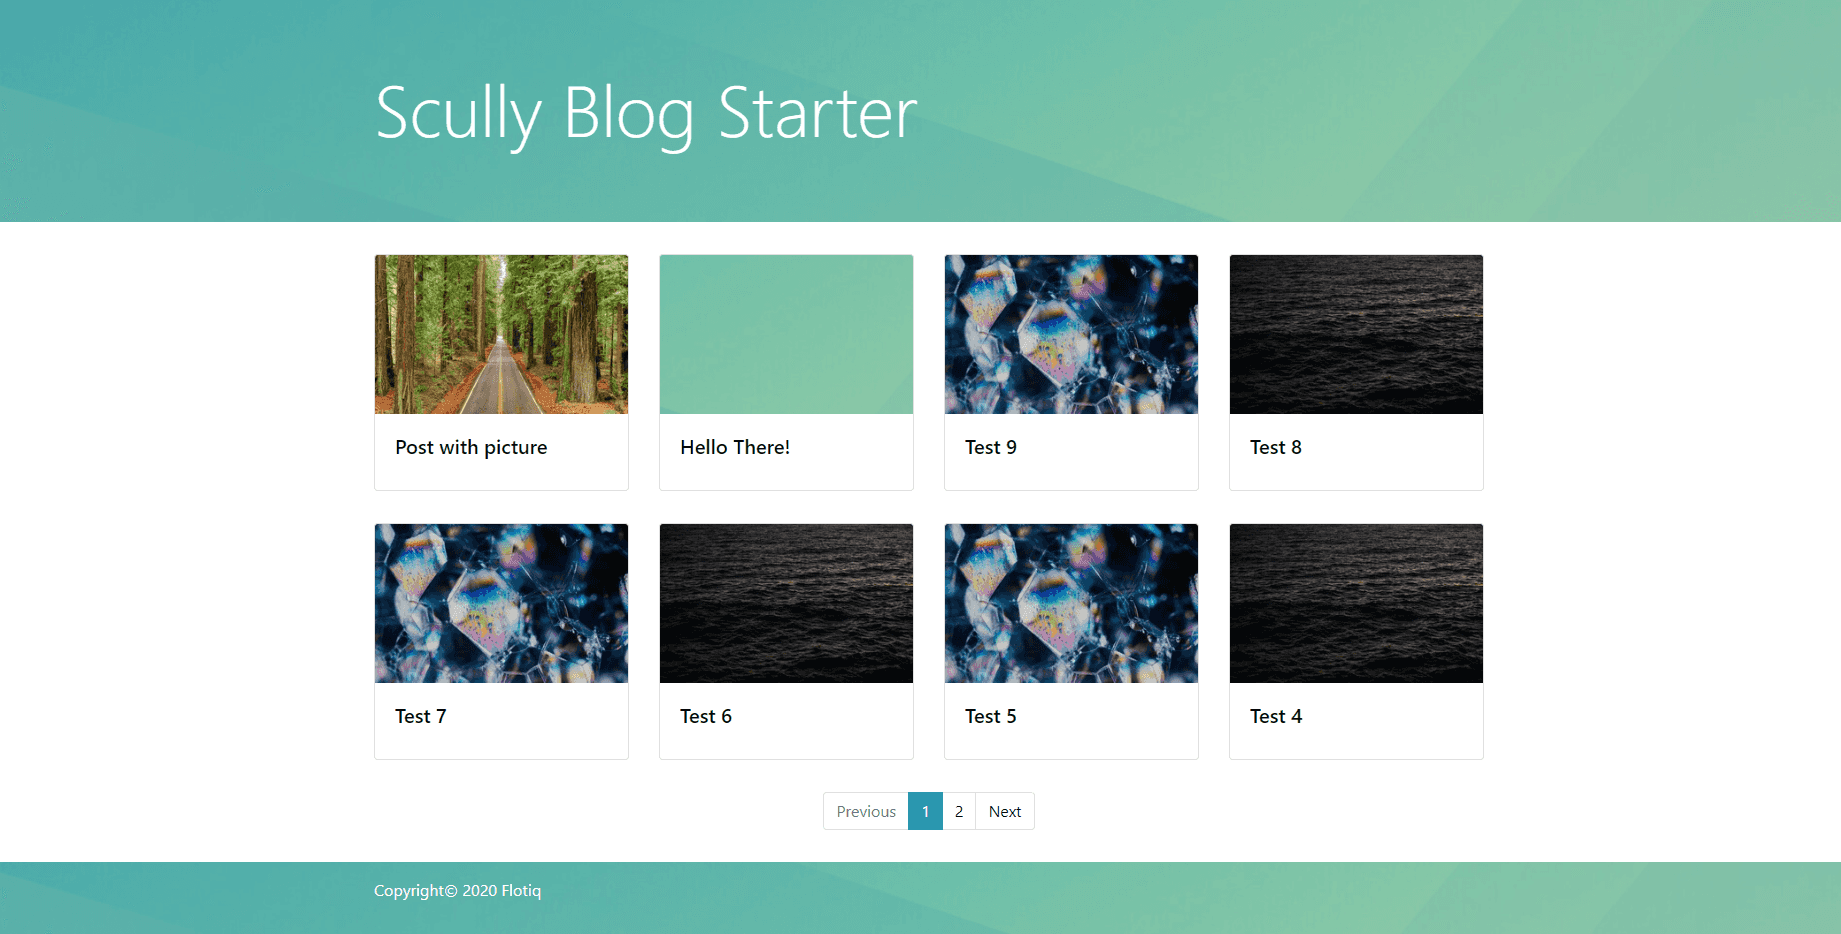 Angular blog starter with Scully